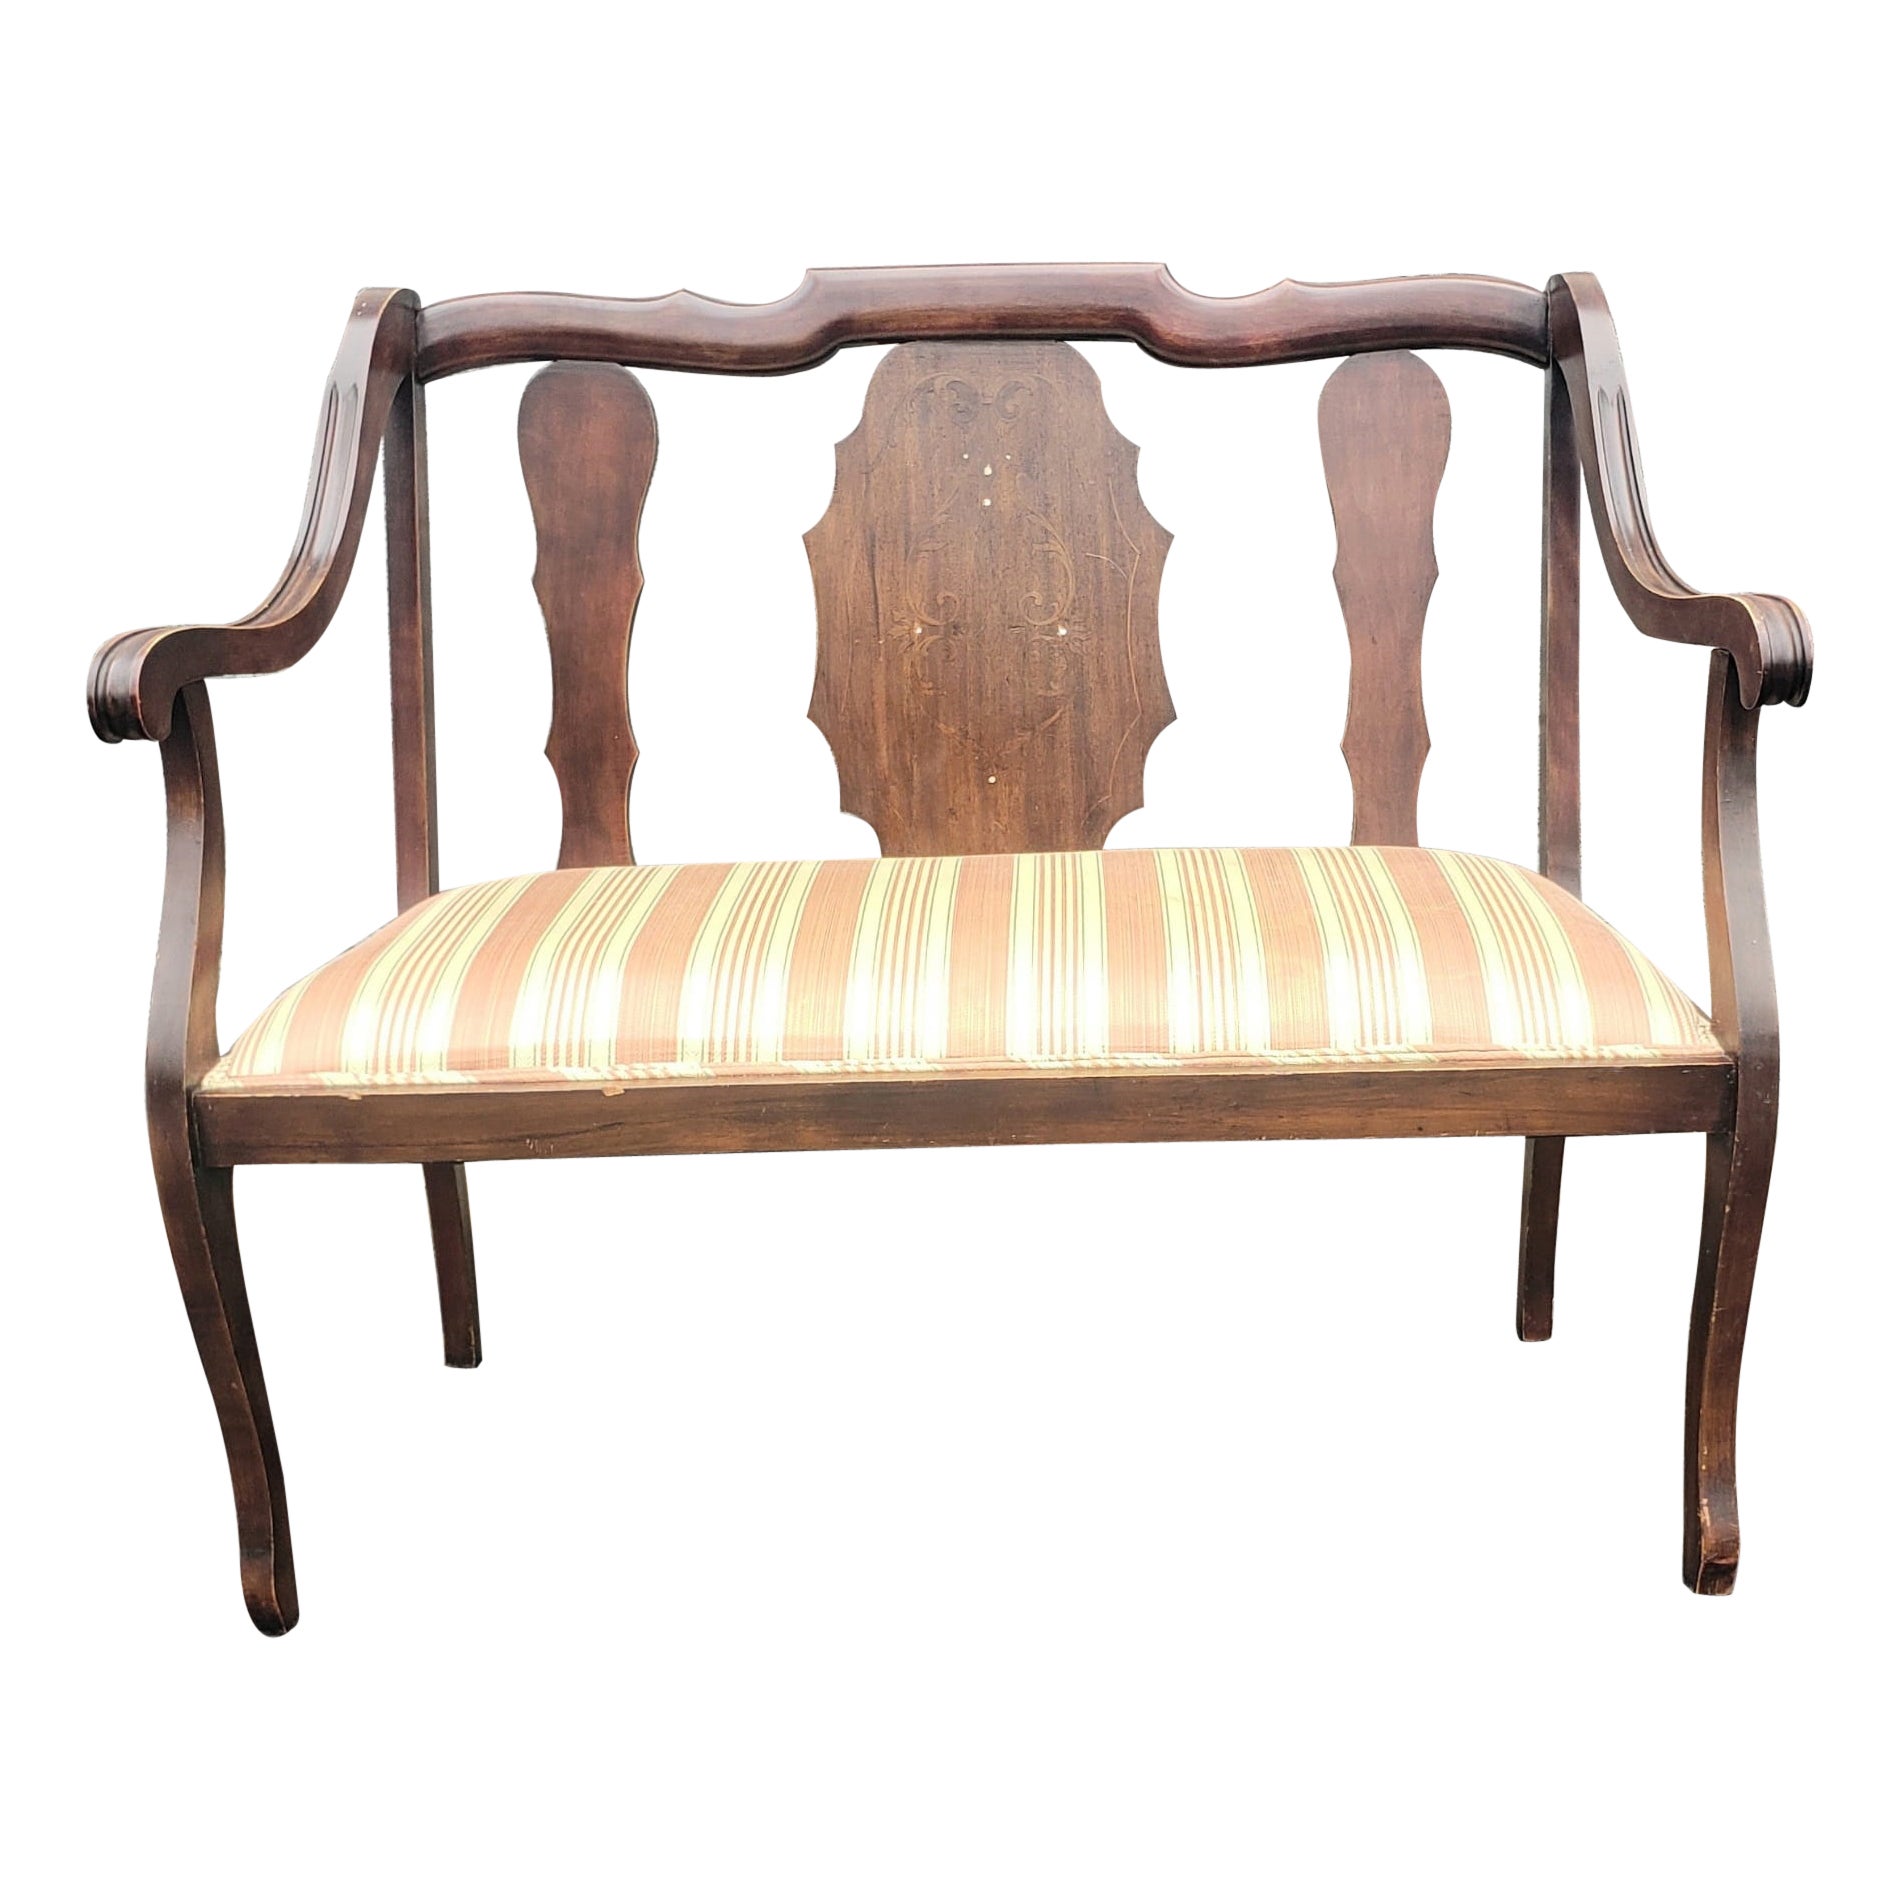 20th Century George III Style Walnut with Inlay and Upholstered Seat Settee